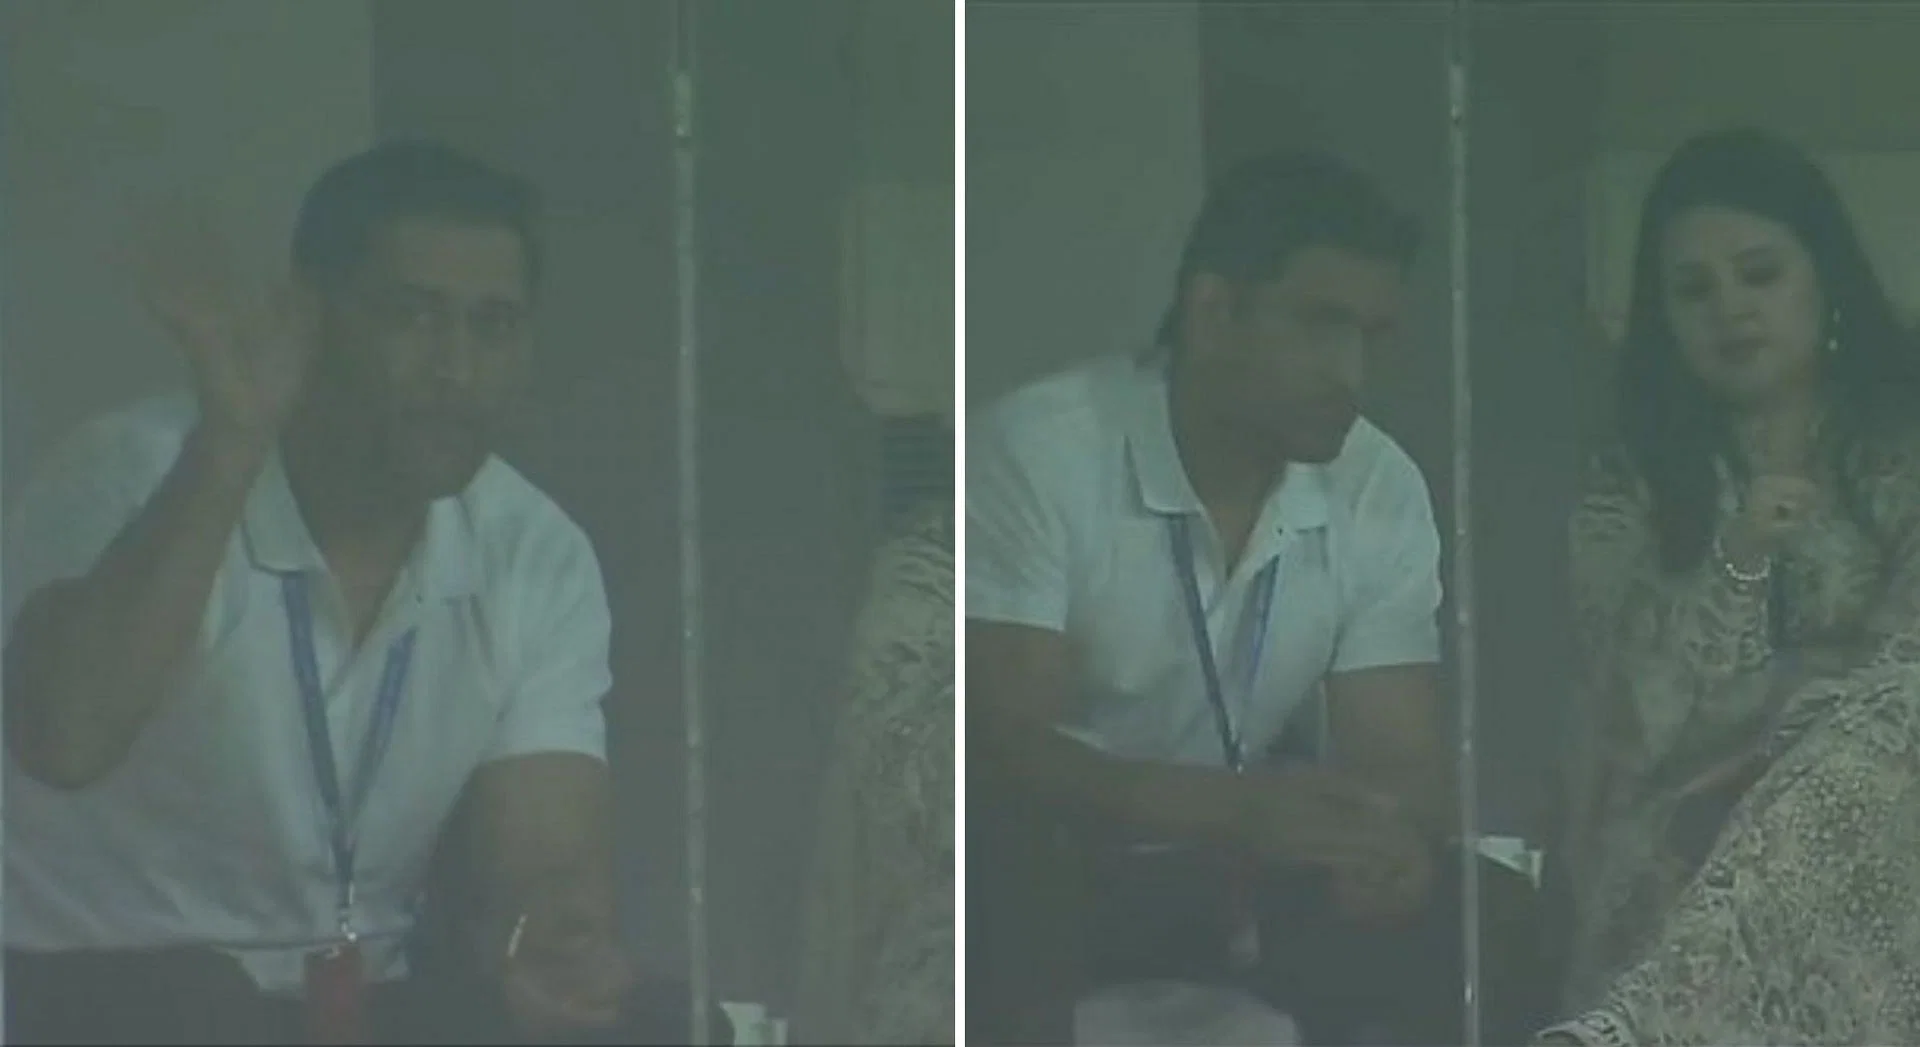 [WATCH] MS Dhoni Greets Spectators During India vs New Zealand’s 1st T20I In Ranchi